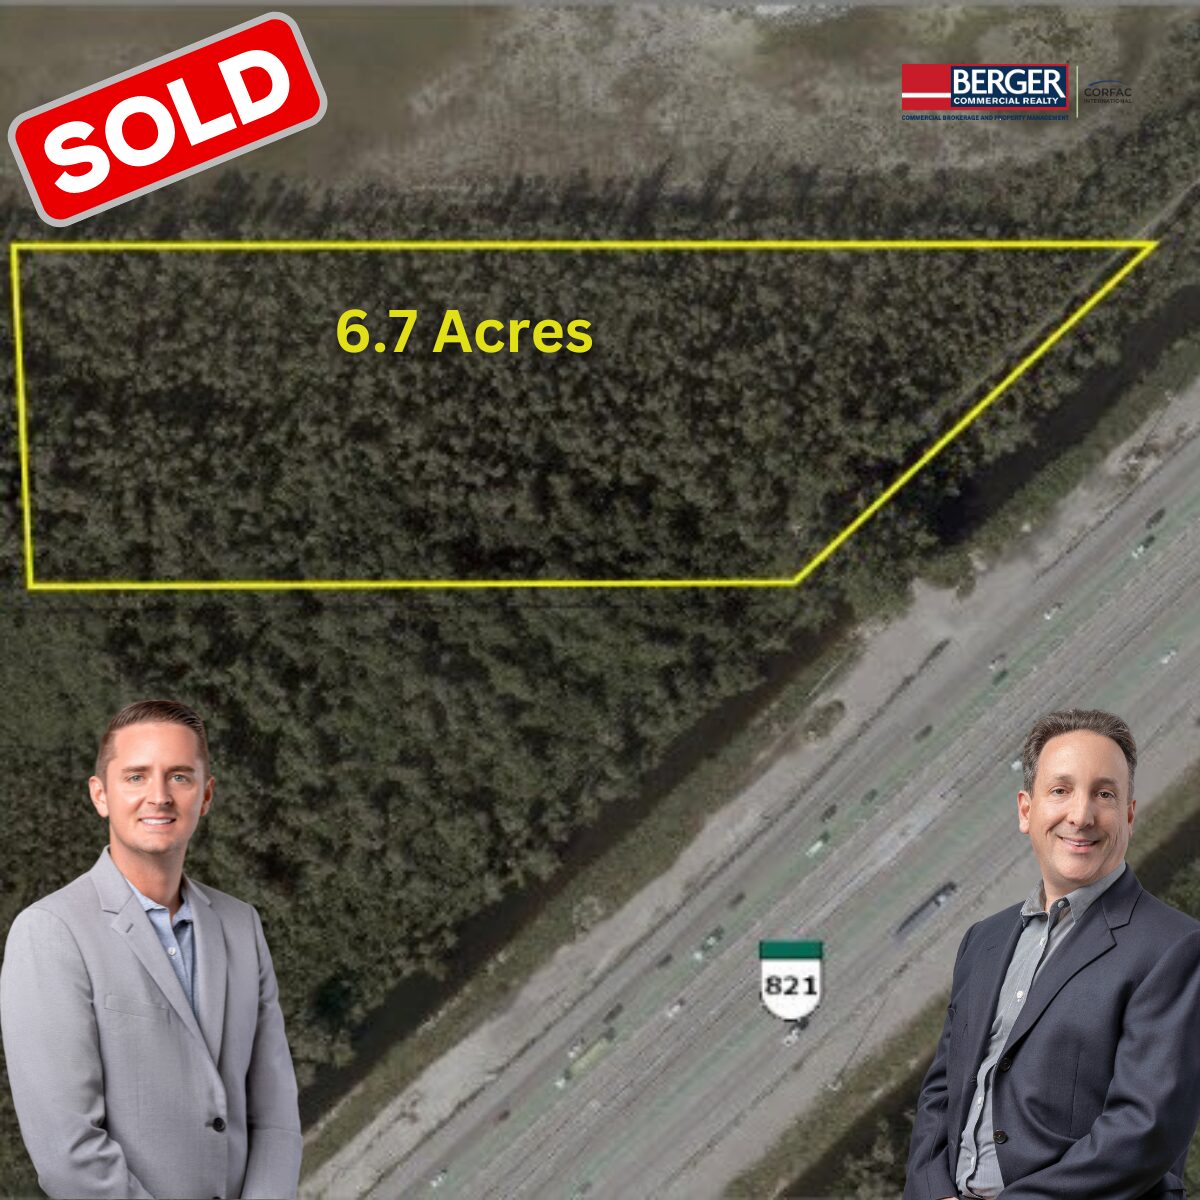 Berger Commercial Realty’s Jonathan Thiel, Lawrence Oxenberg Negotiates Sale Of 6.7 Acres